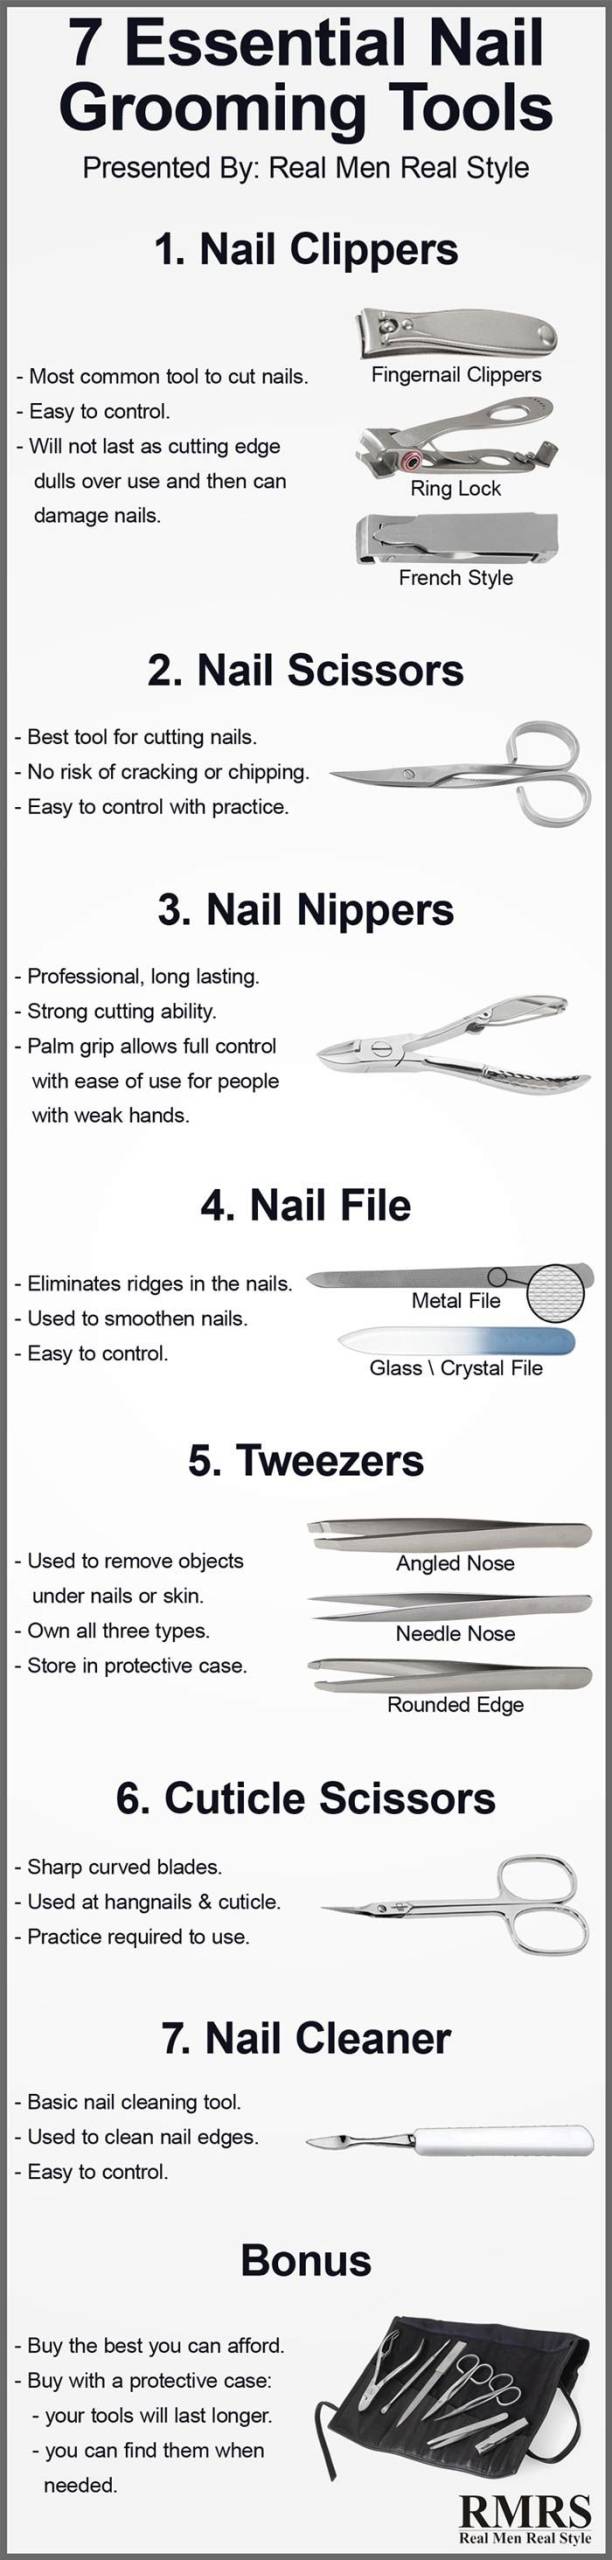 How to clean your nail technician tools list of tools infographic